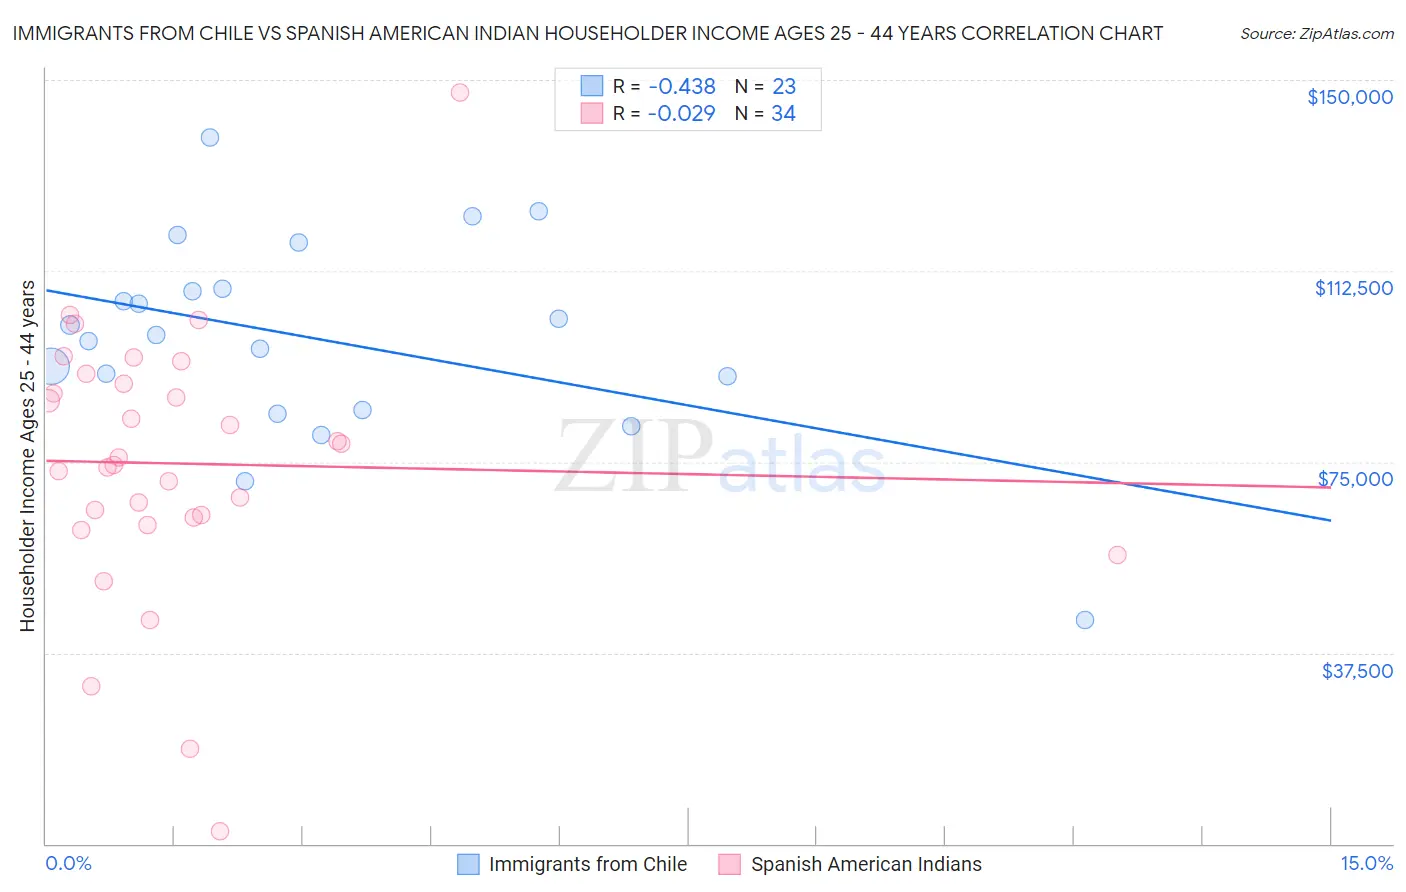 Immigrants from Chile vs Spanish American Indian Householder Income Ages 25 - 44 years